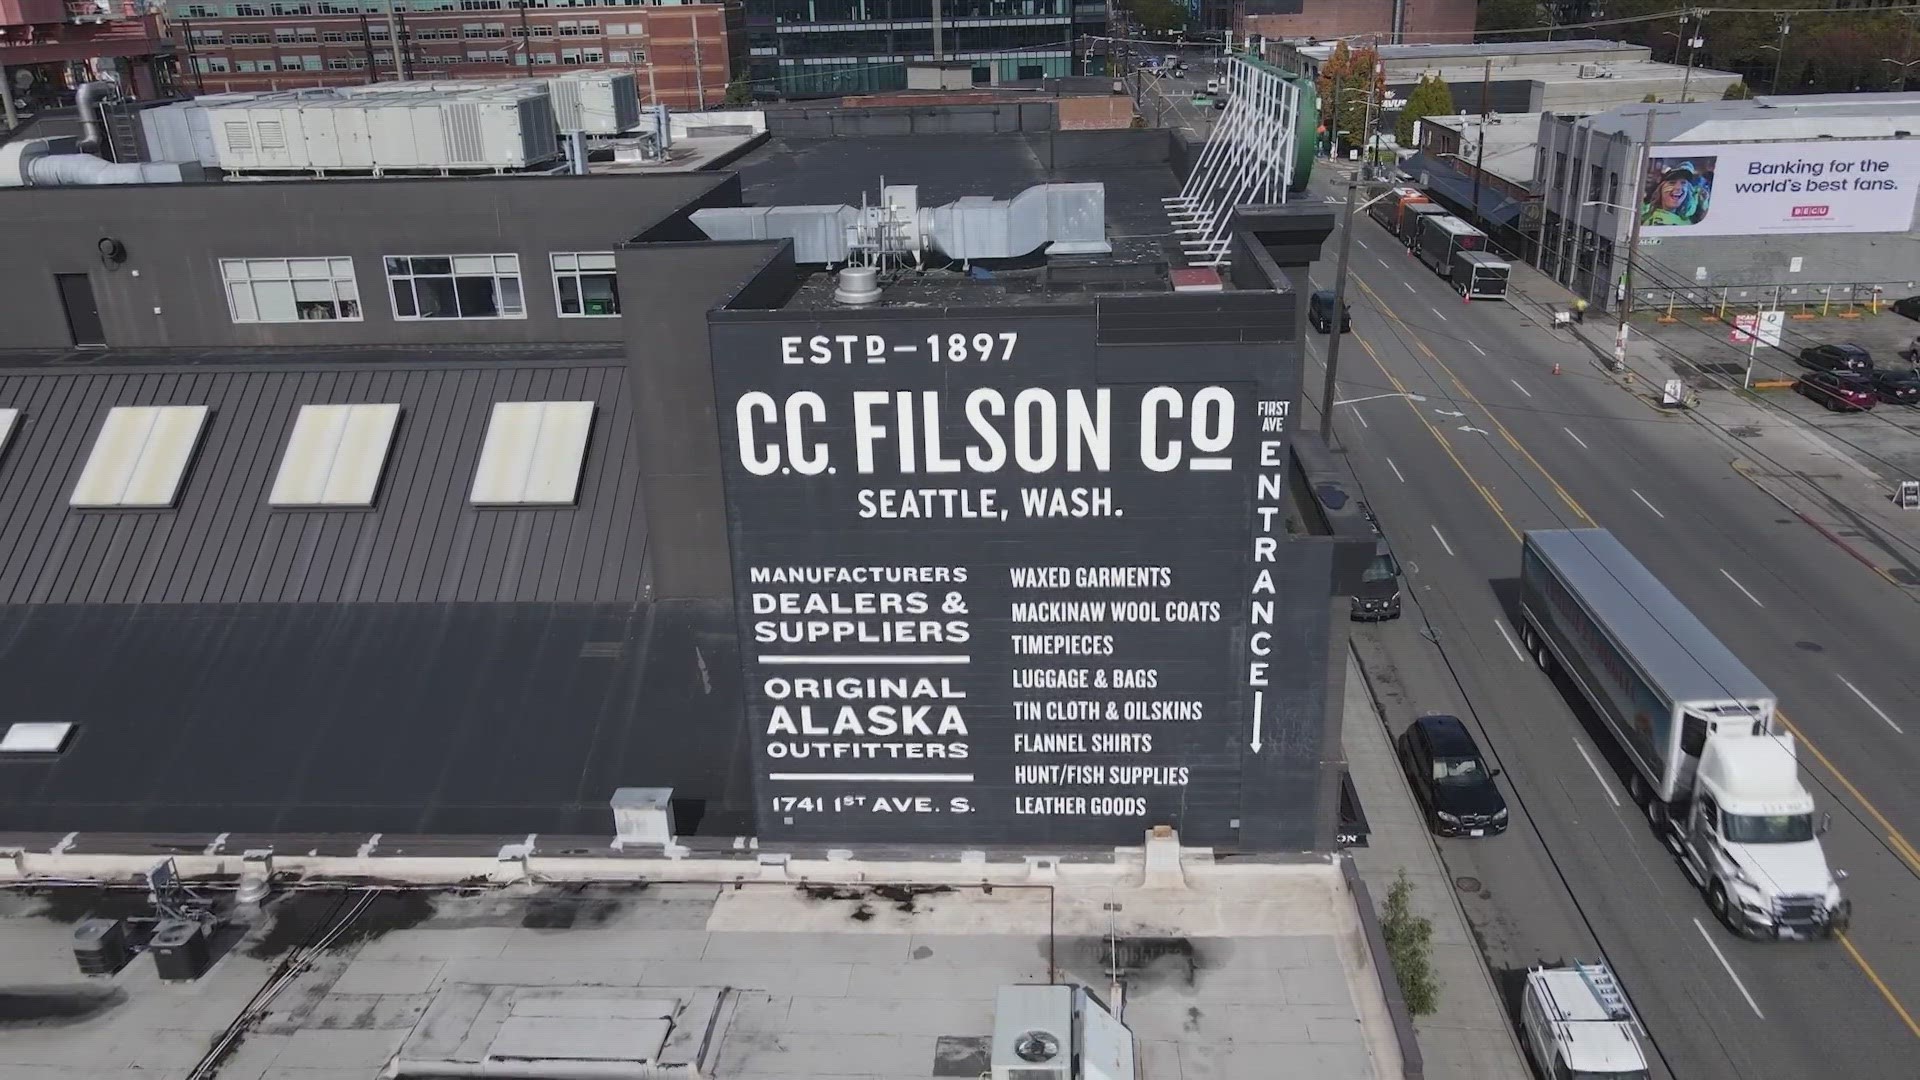 Filson has a 126-year history in Seattle but now, up to 26 manufacturing employees in the area could lose their jobs.